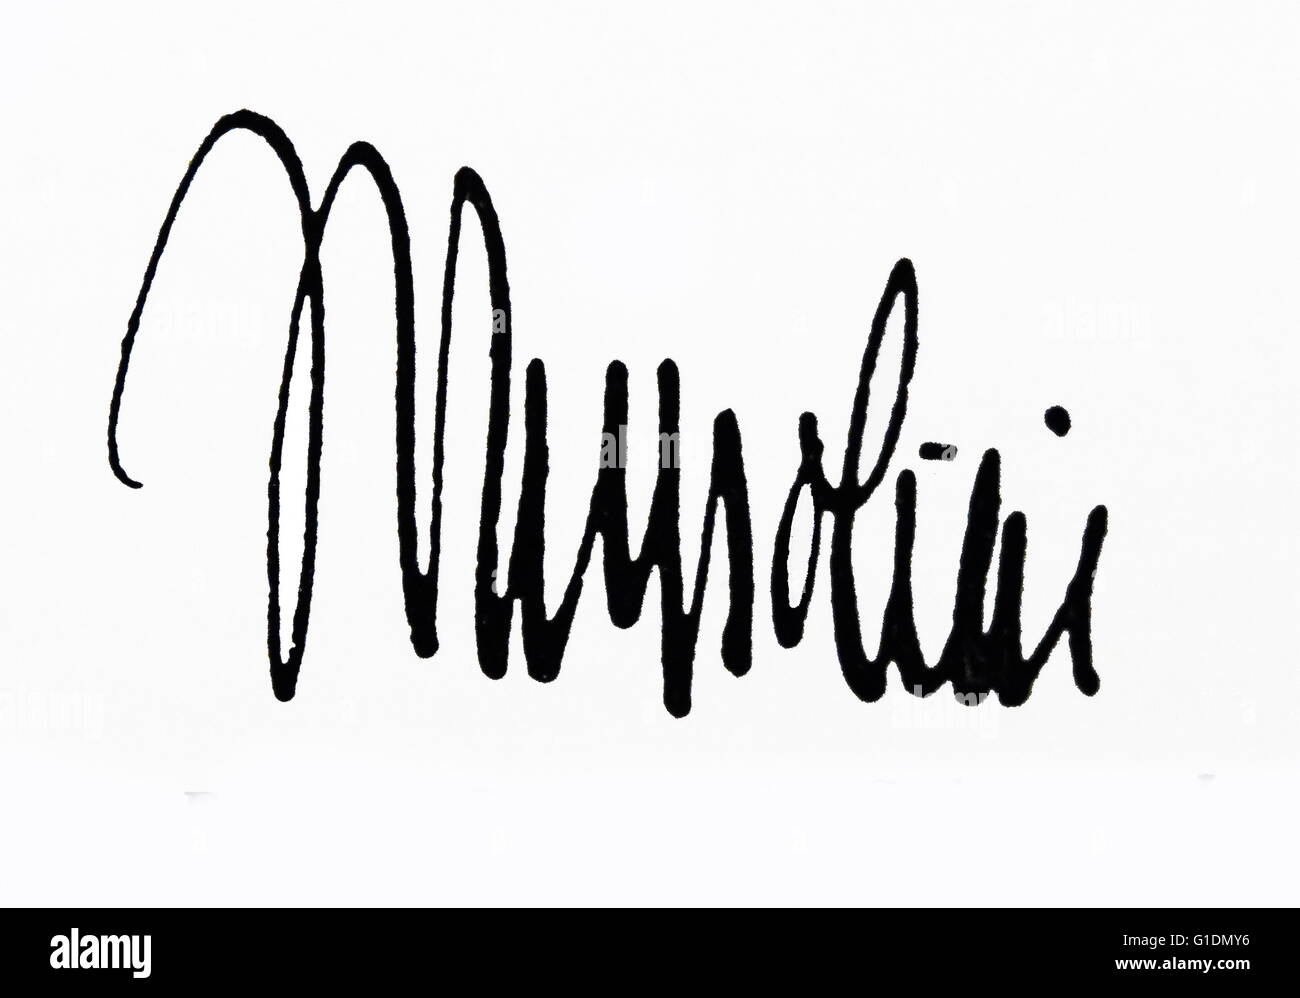 Signature of Benito Mussolini (1833-1945) Italian politician, journalist, and leader of the National Fascist Party and Prime Minister of Italy. Dated 20th Century Stock Photo